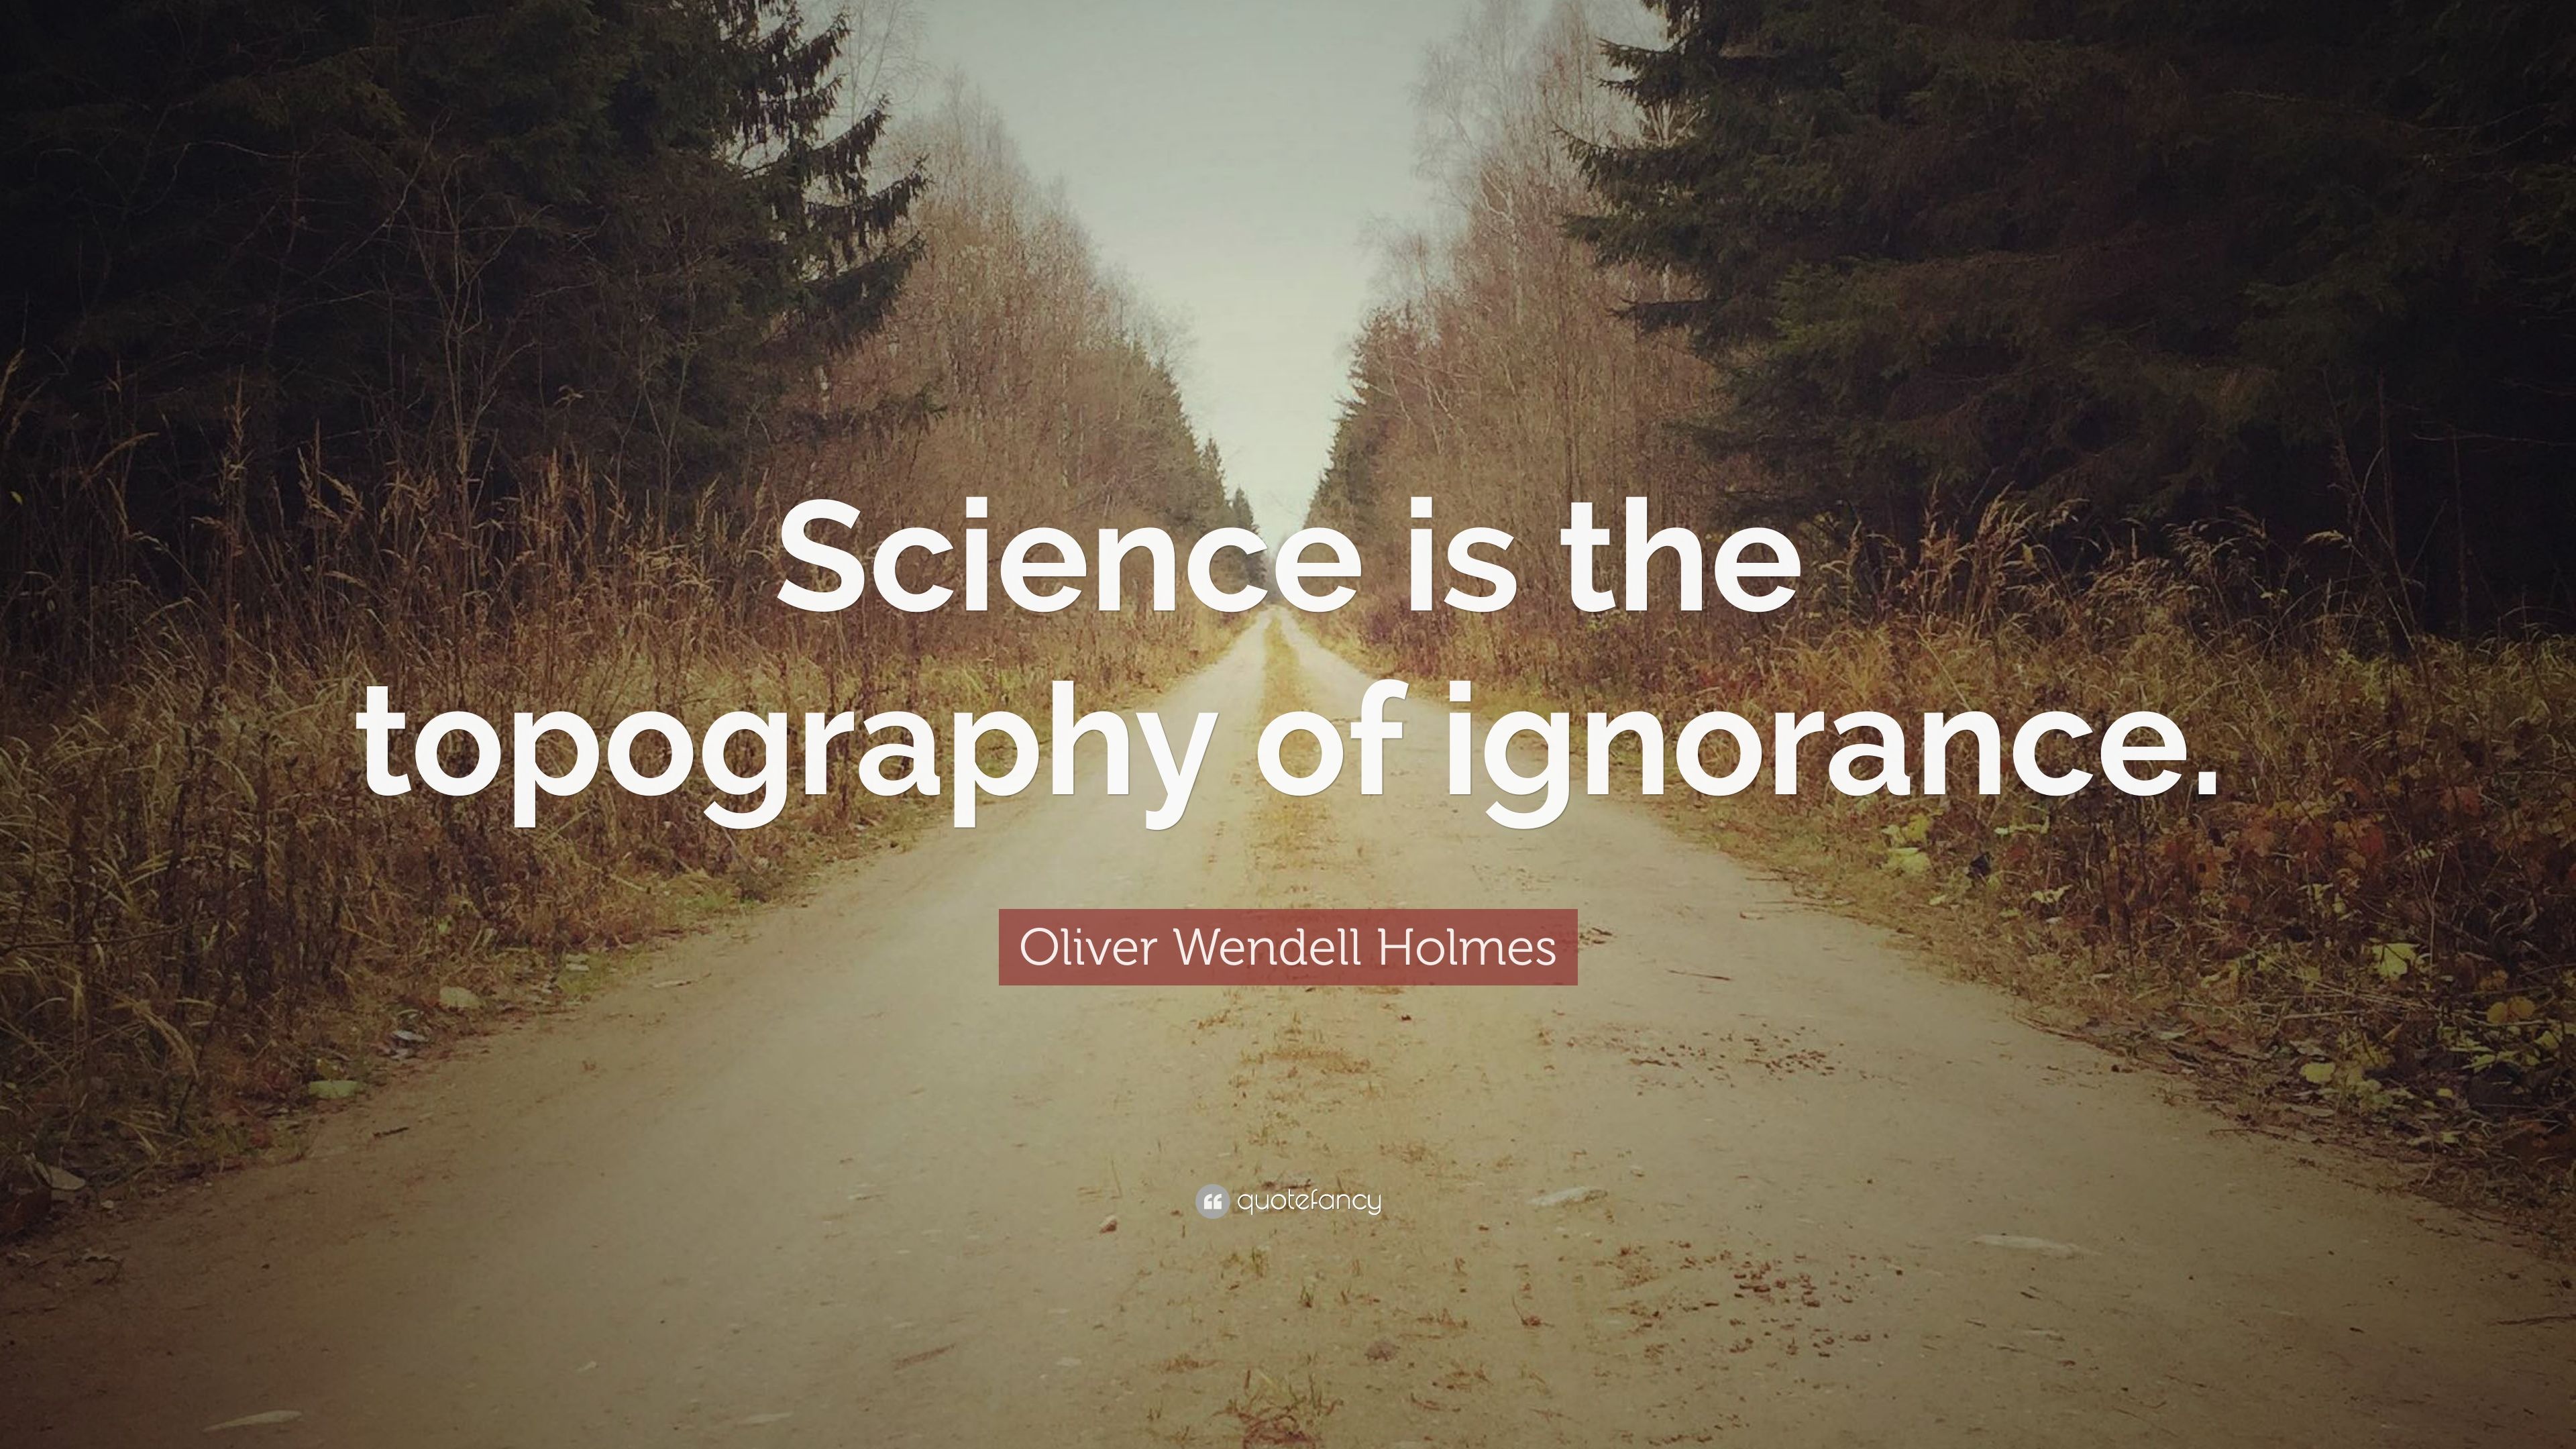 Oliver Wendell Holmes Quote: “Science is the topography of ignorance.” (10 wallpaper)